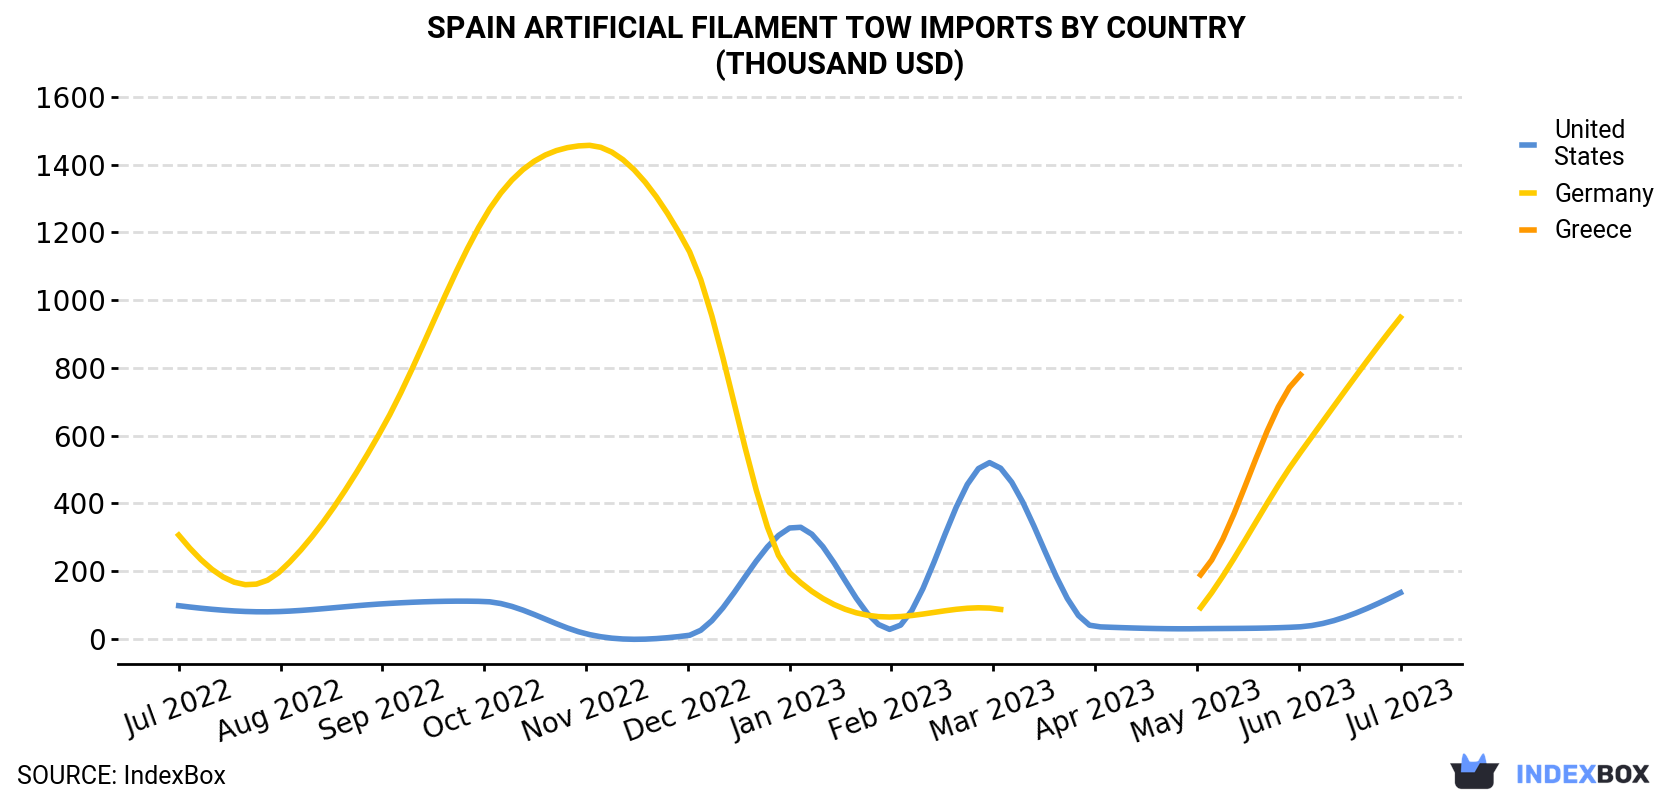 Spain Artificial Filament Tow Imports By Country (Thousand USD)